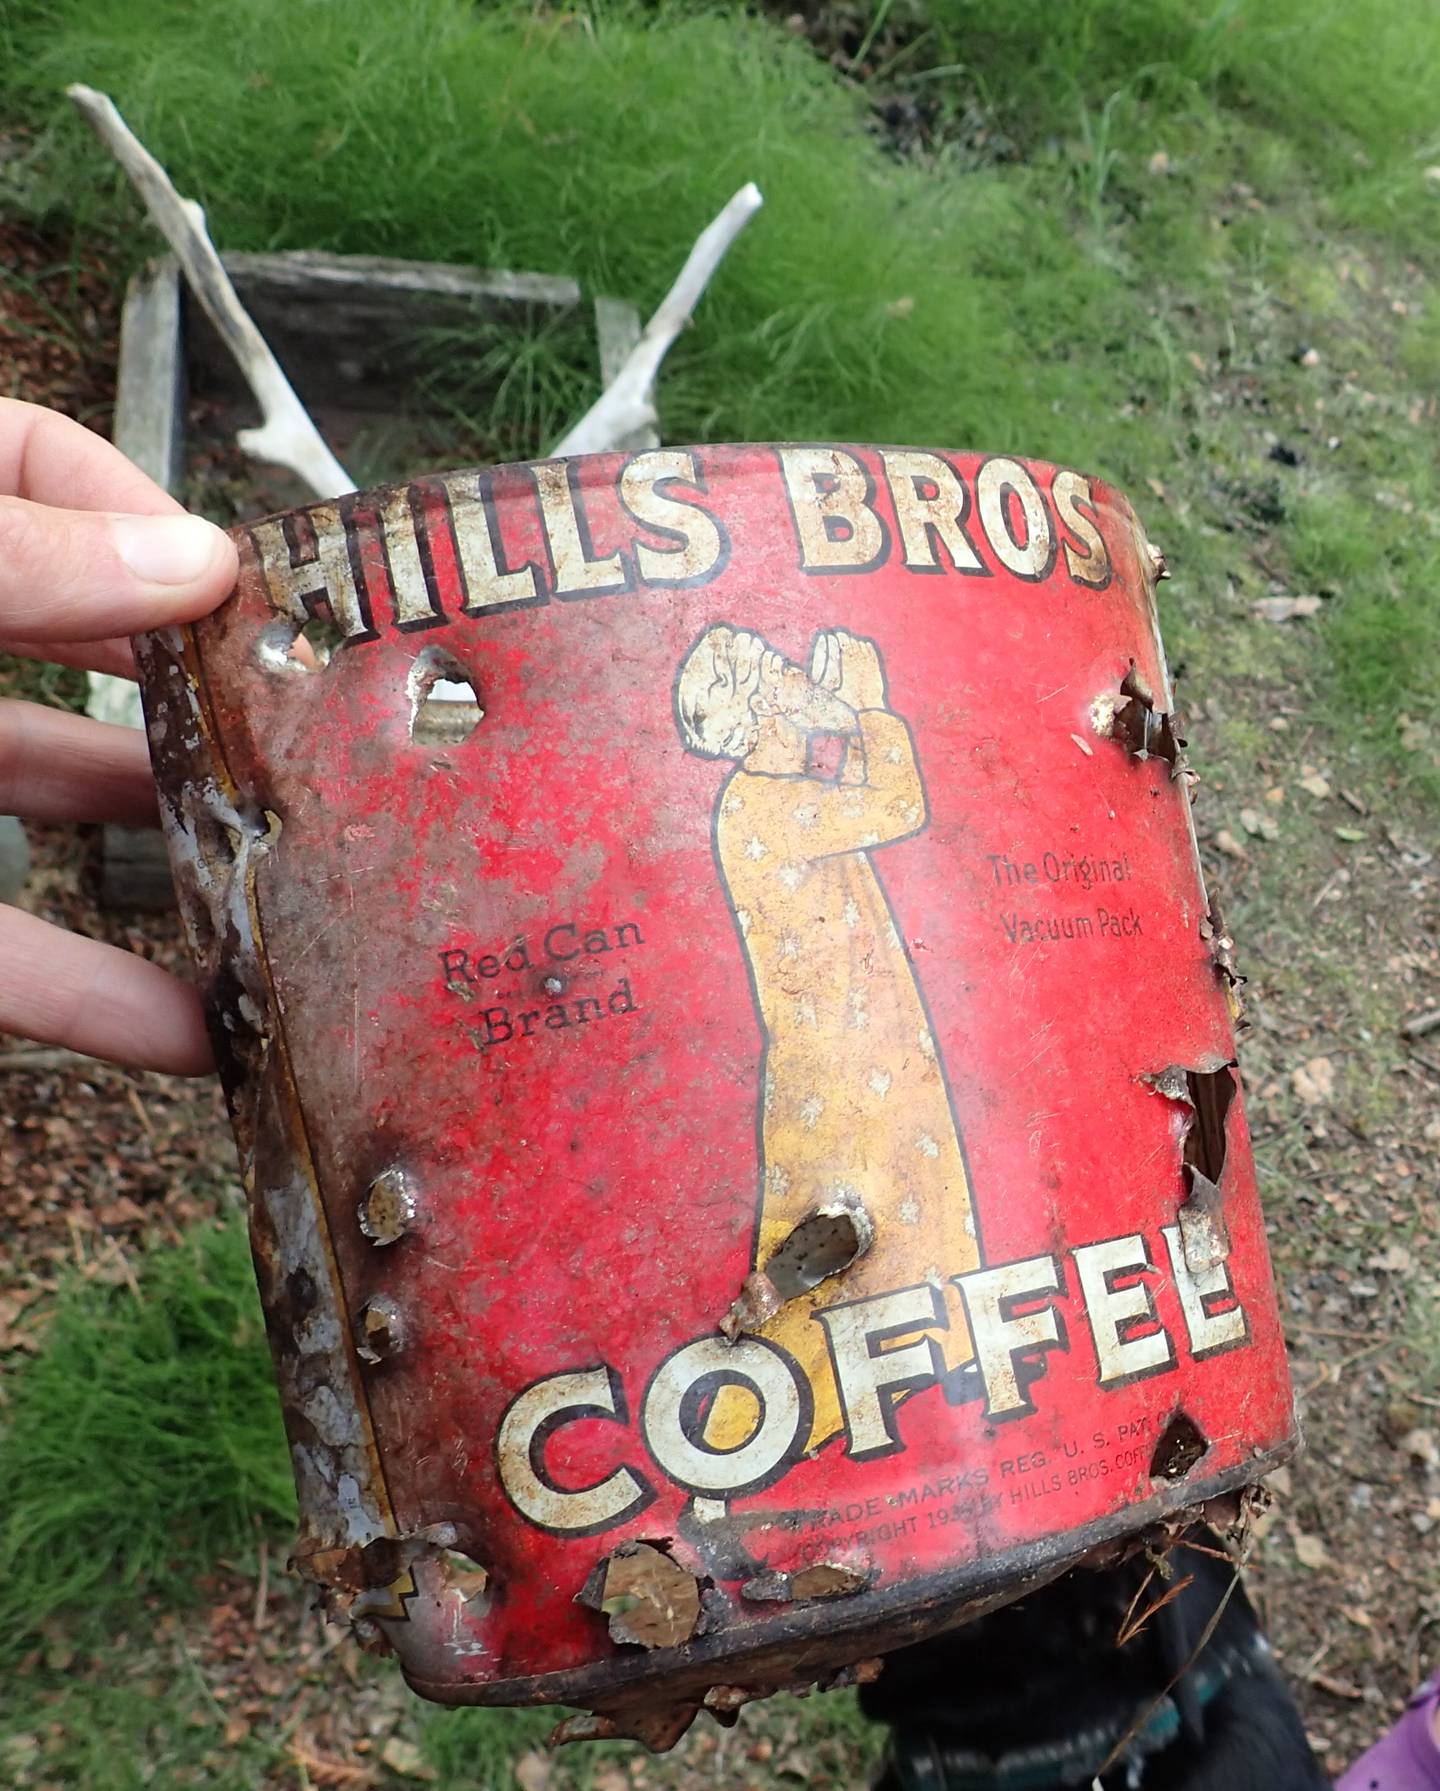 A Hills Bros. coffee can